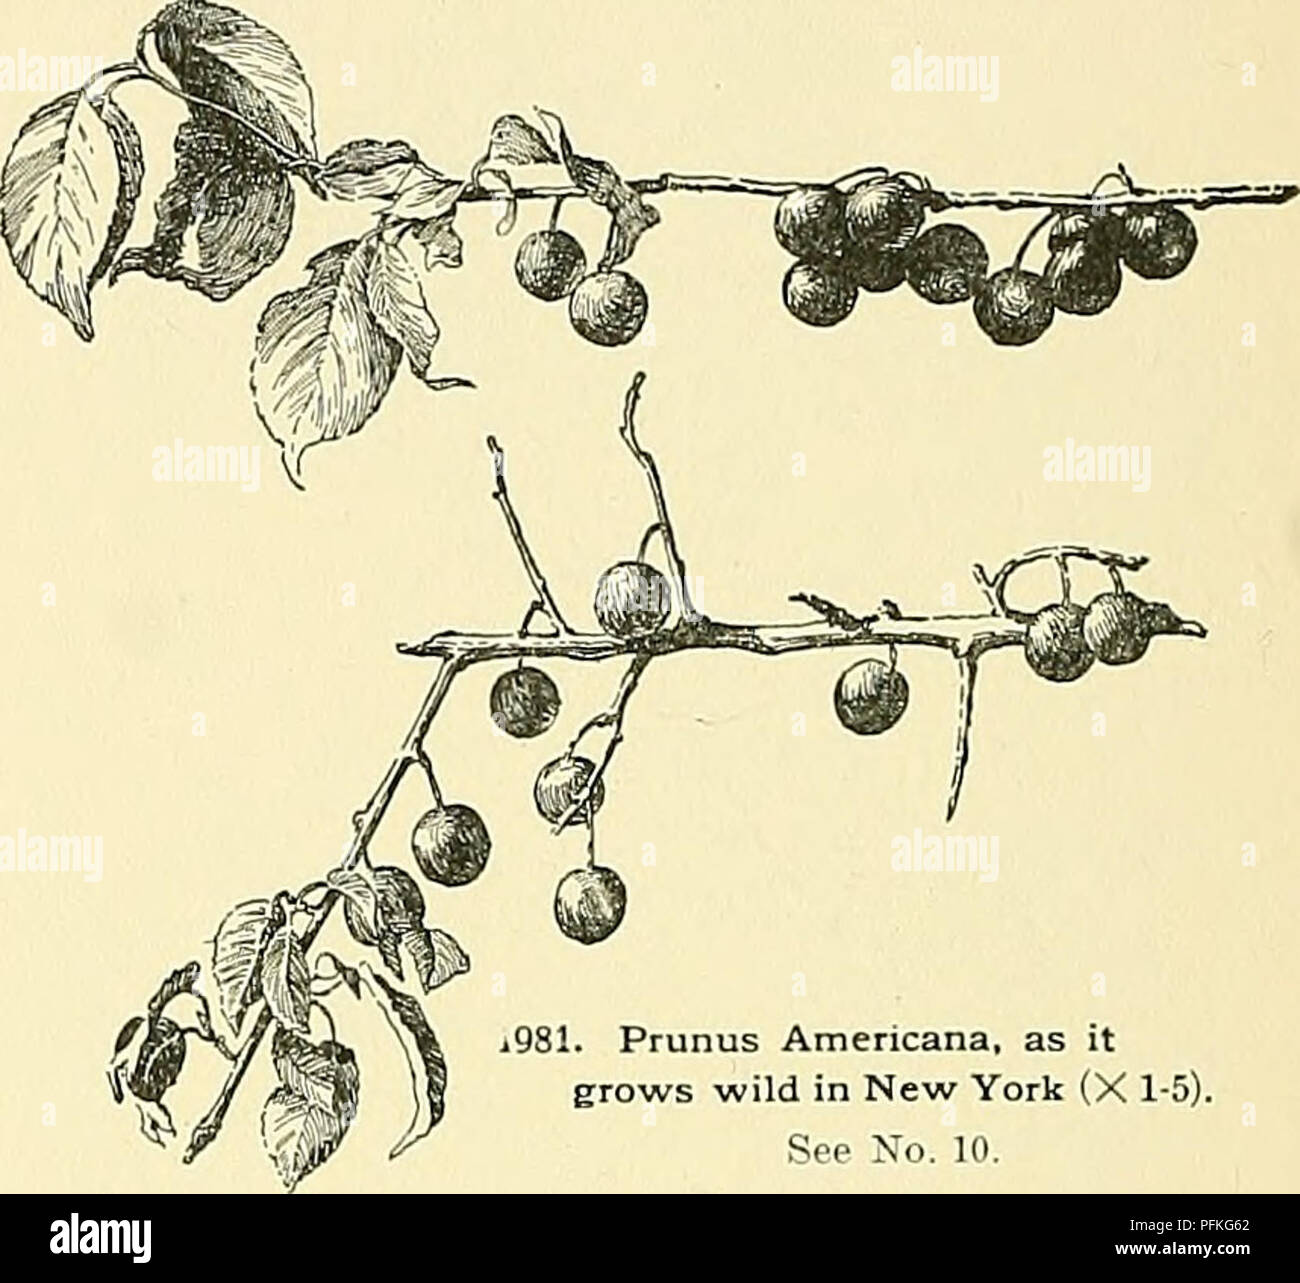 . Cyclopedia of American horticulture, comprising suggestions for cultivation of horticultural plants, descriptions of the species of fruits, vegetables, flowers, and ornamental plants sold in the United States and Canada, together with geographical and biographical sketches. Gardening. 1980. Prunus triflora—Japanese Plum. From specimens in the herbarium at the Royal Gardens, Kew. iQSl. Prunus Americana, as it erows wild in New York (X 1-5). See No. 10. BBB. American ornative Plums: Ivs. relatively narrow and smooth and the yoking growth glabrous (P. subeordata and P. Americana partial excep-  Stock Photo